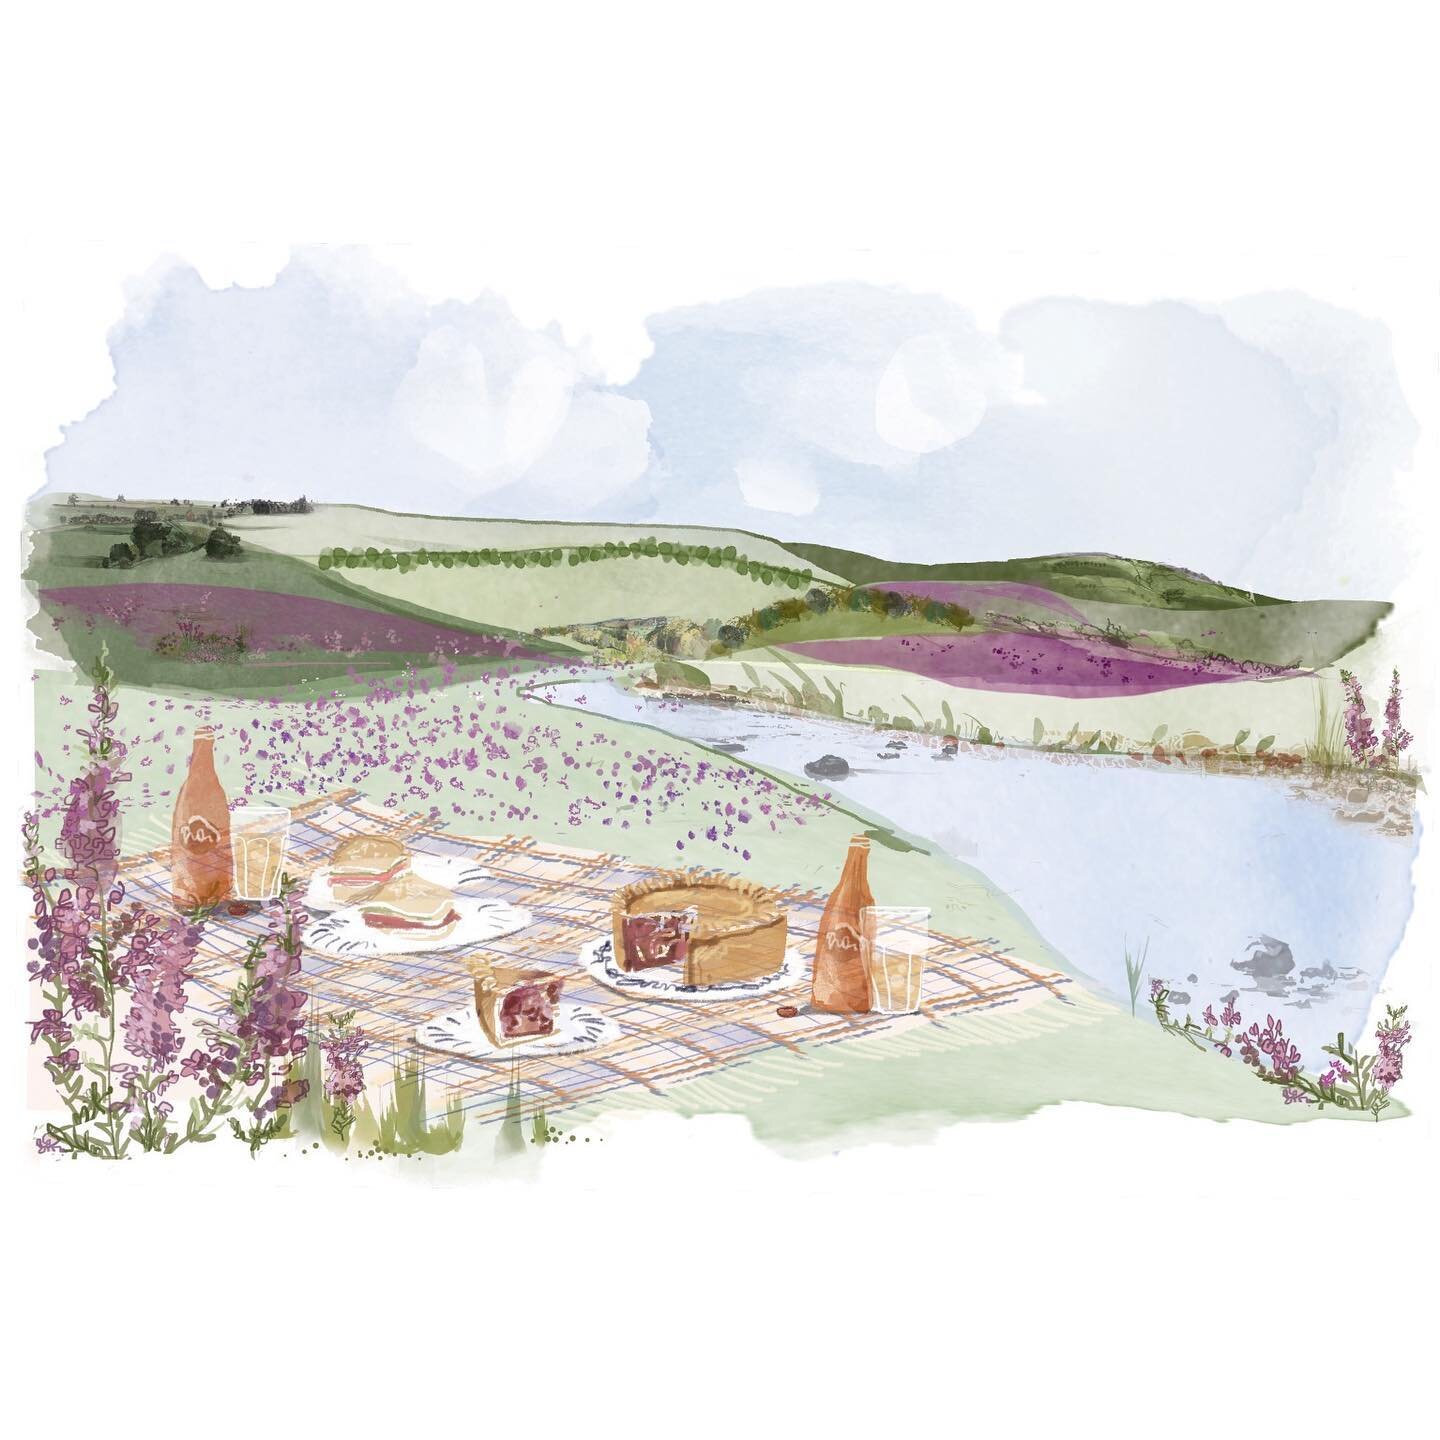 Welcome to Picnic season 🌿🍴&rsquo;Eat your way through the summer months with panache as only the British can&rsquo; 

Getting view envy of the highlands 
From my recent commission for @thefieldmagazine Out today. 💜

#thefieldmagazine #outdooreati